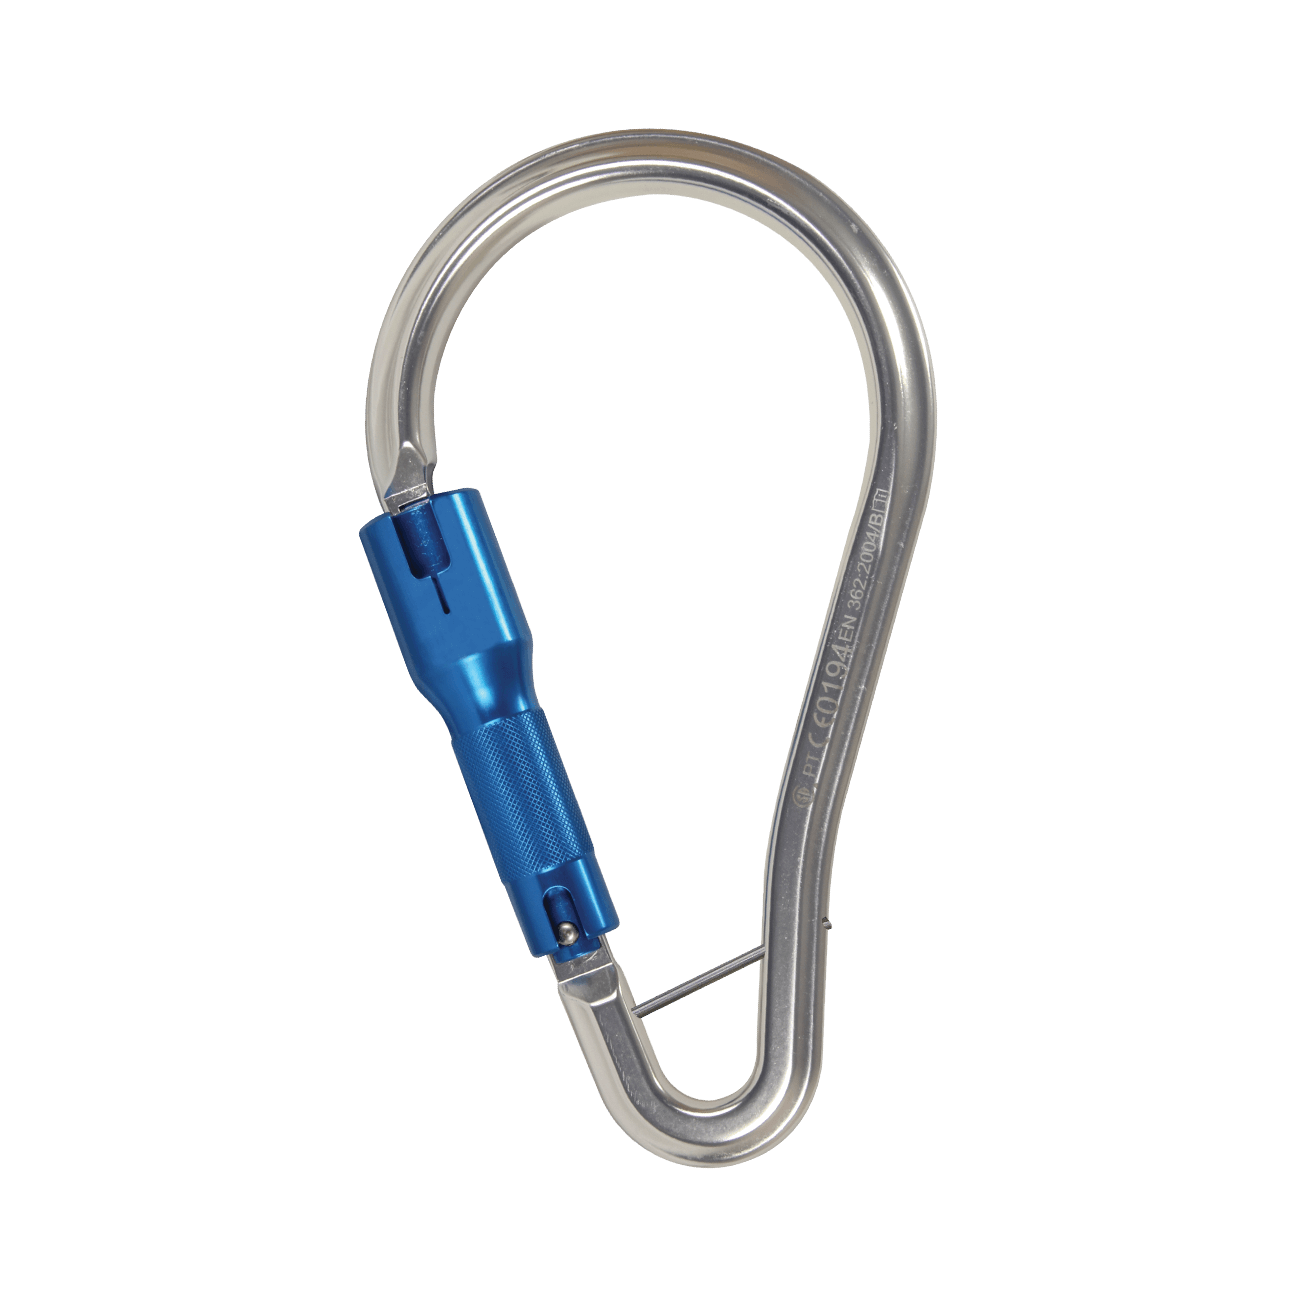 Aluminum Alloy Connecting Carabiner, 2" Open Gate Capacity